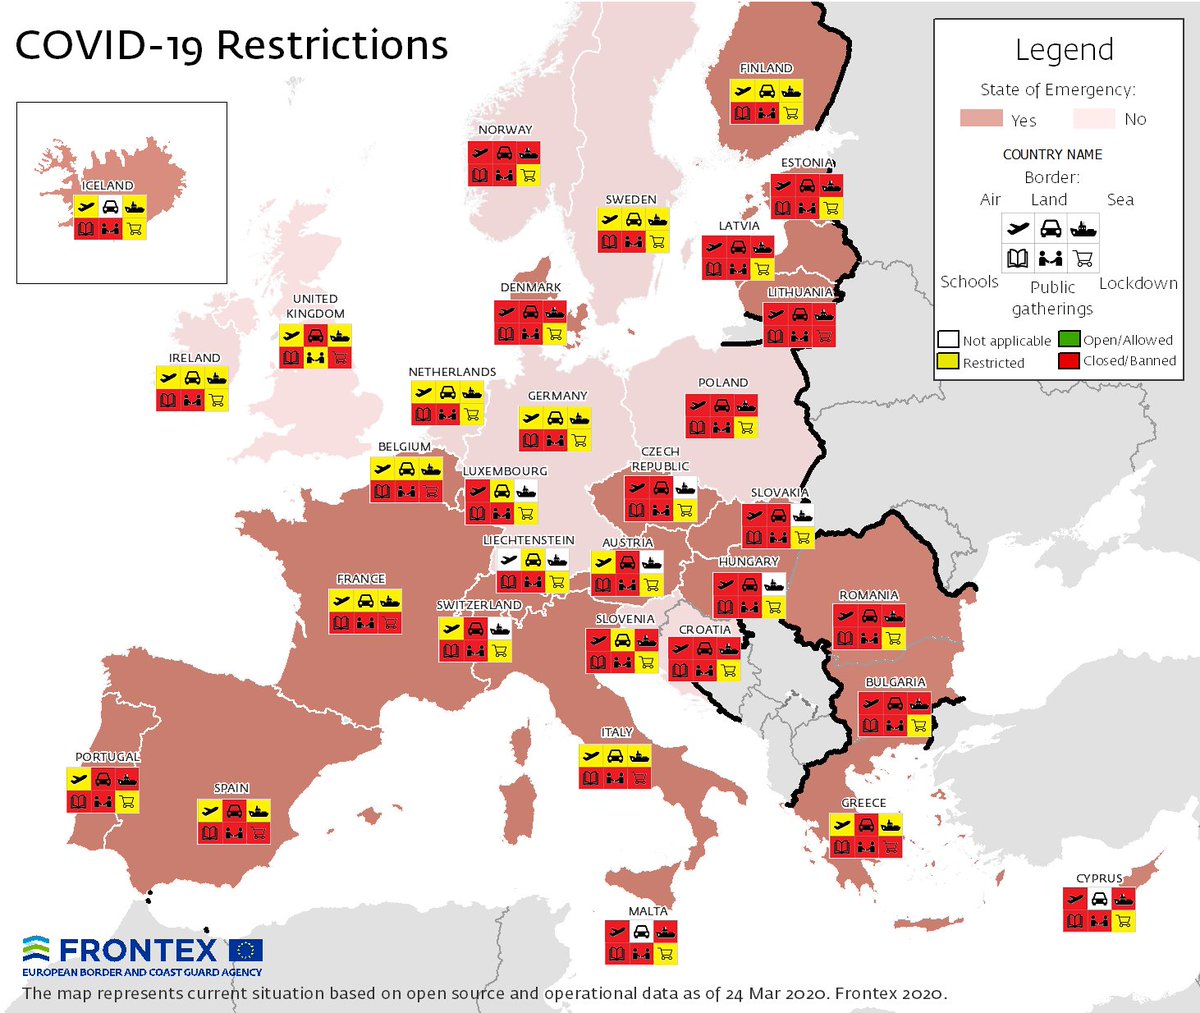 Frontex On Twitter Our Analysts Have Come Up With A Very Useful Map To Track The Temporary Restrictions Put In Place Throughout The Eu Schengen Area And The Uk To Deal With